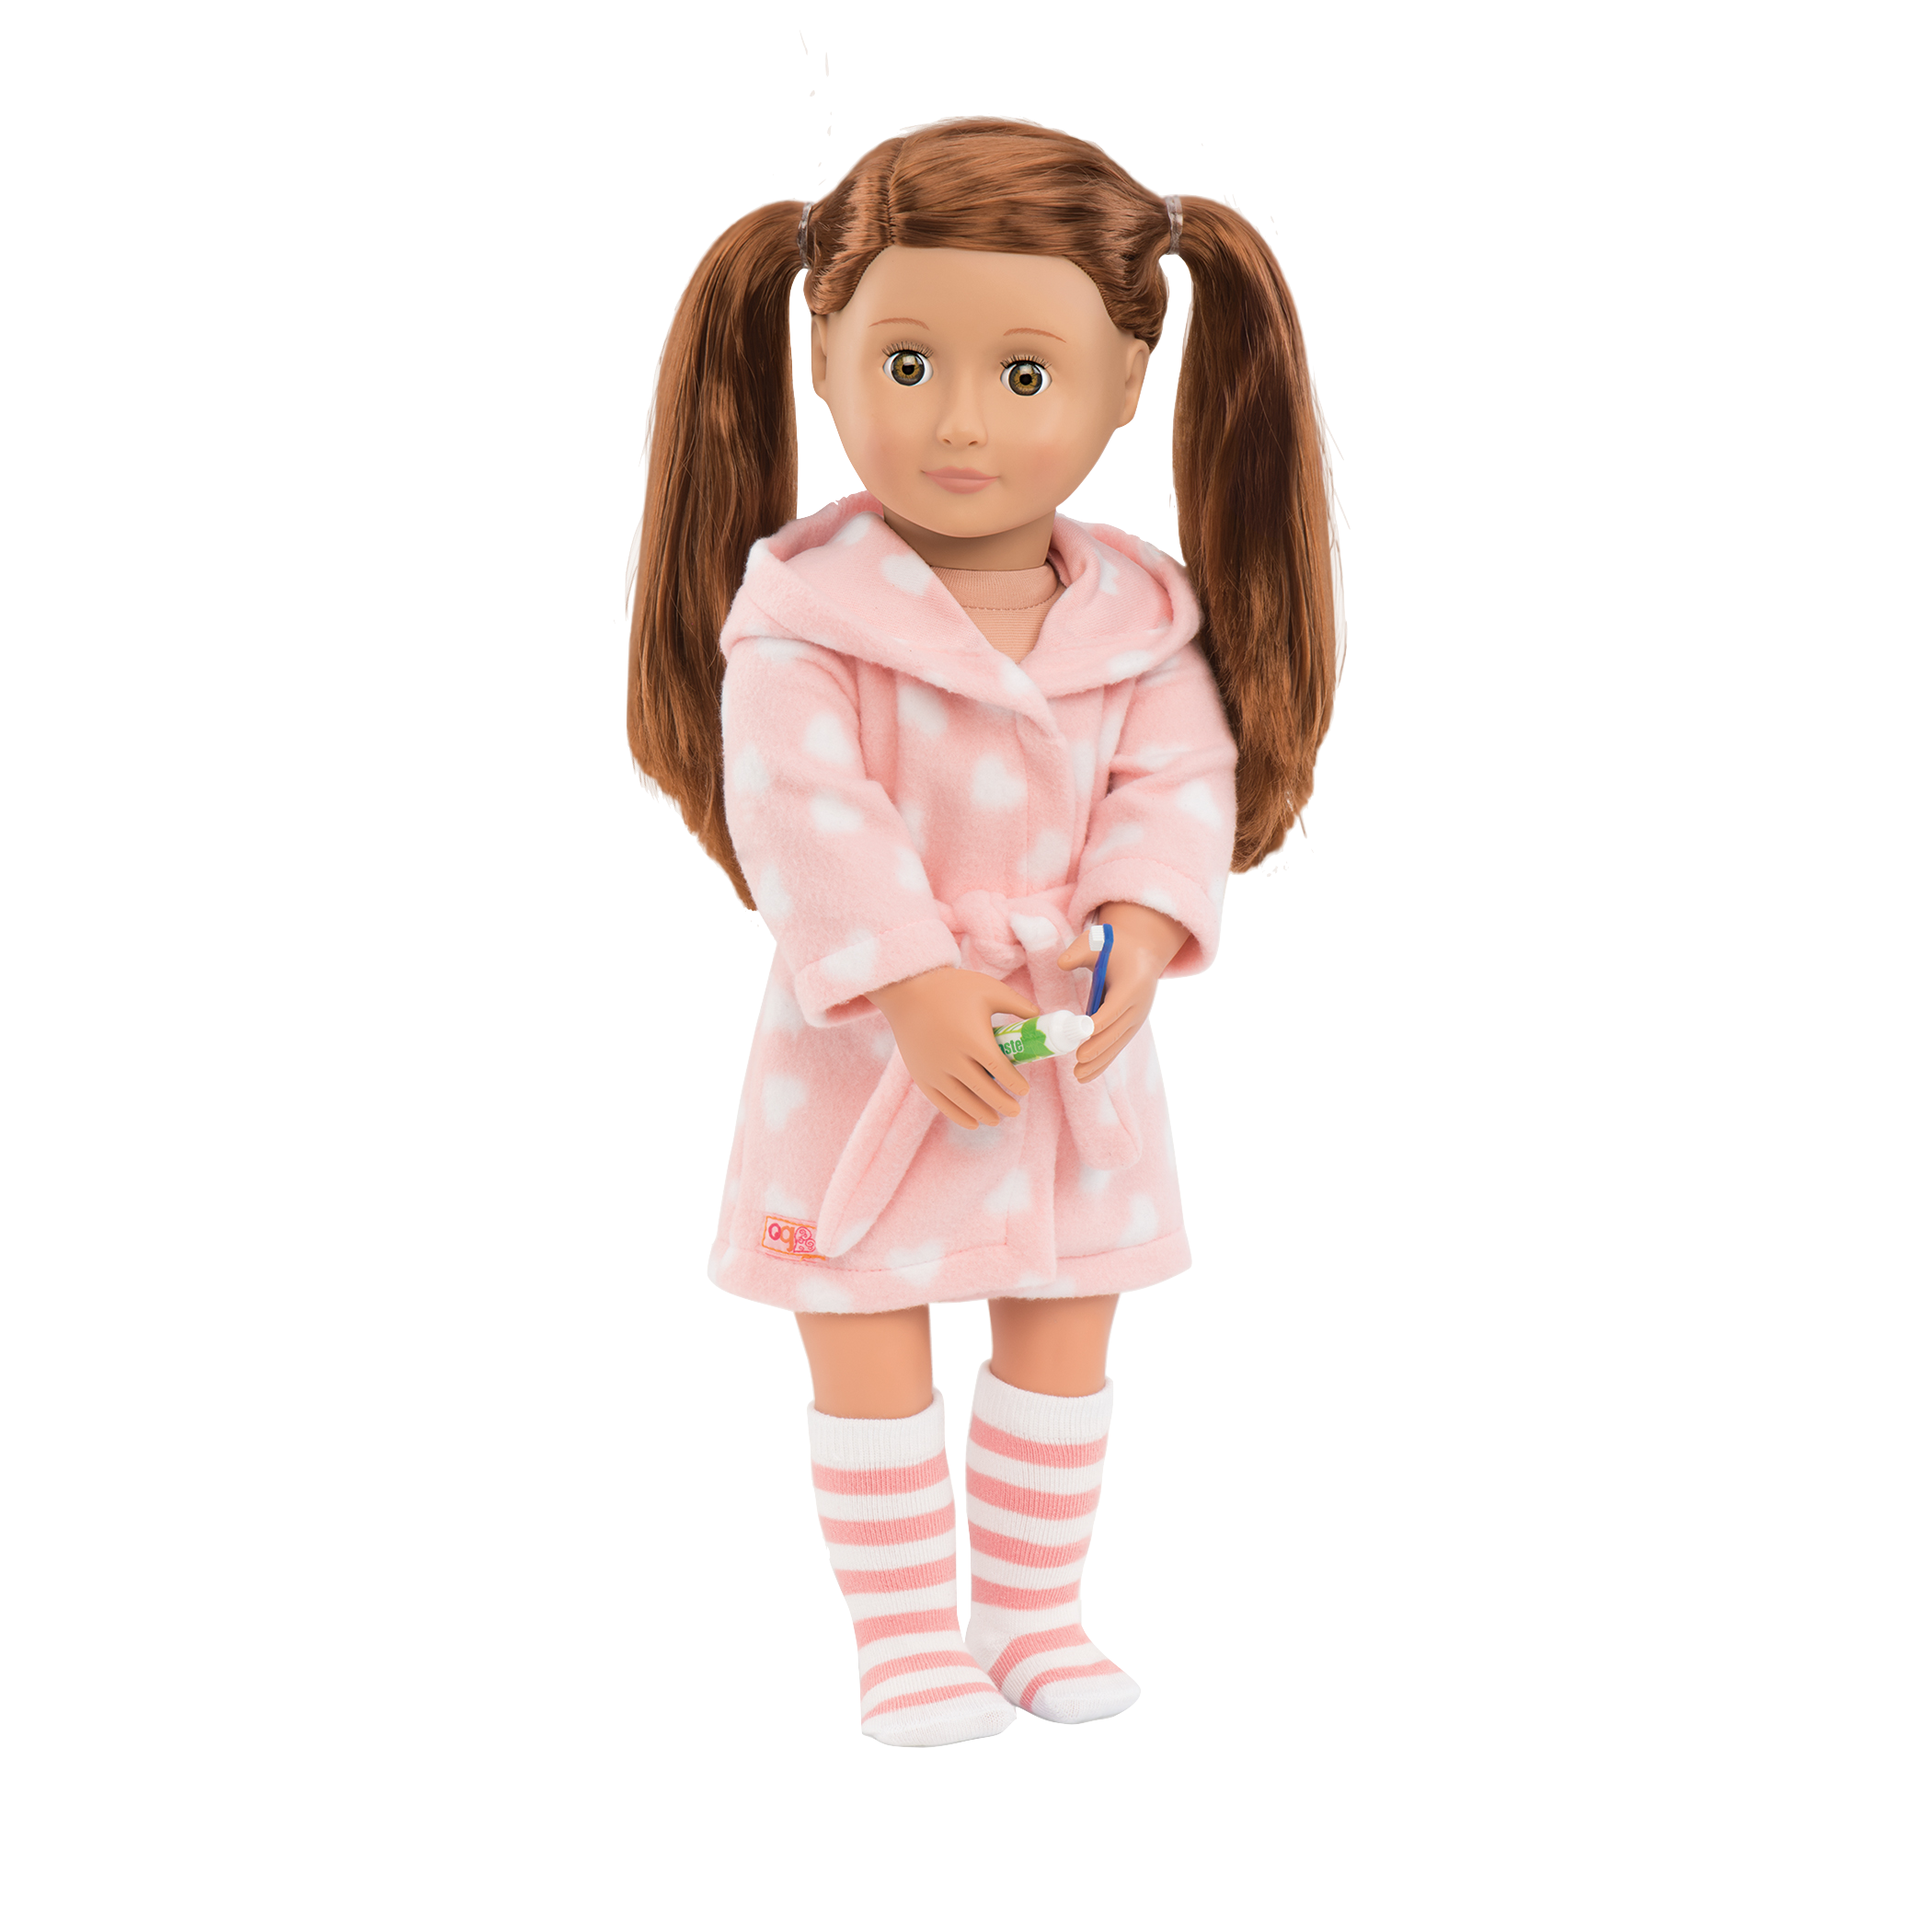 Sleep Tight Our Generation Robe Accessories 18” Dolls NEW Good Night 